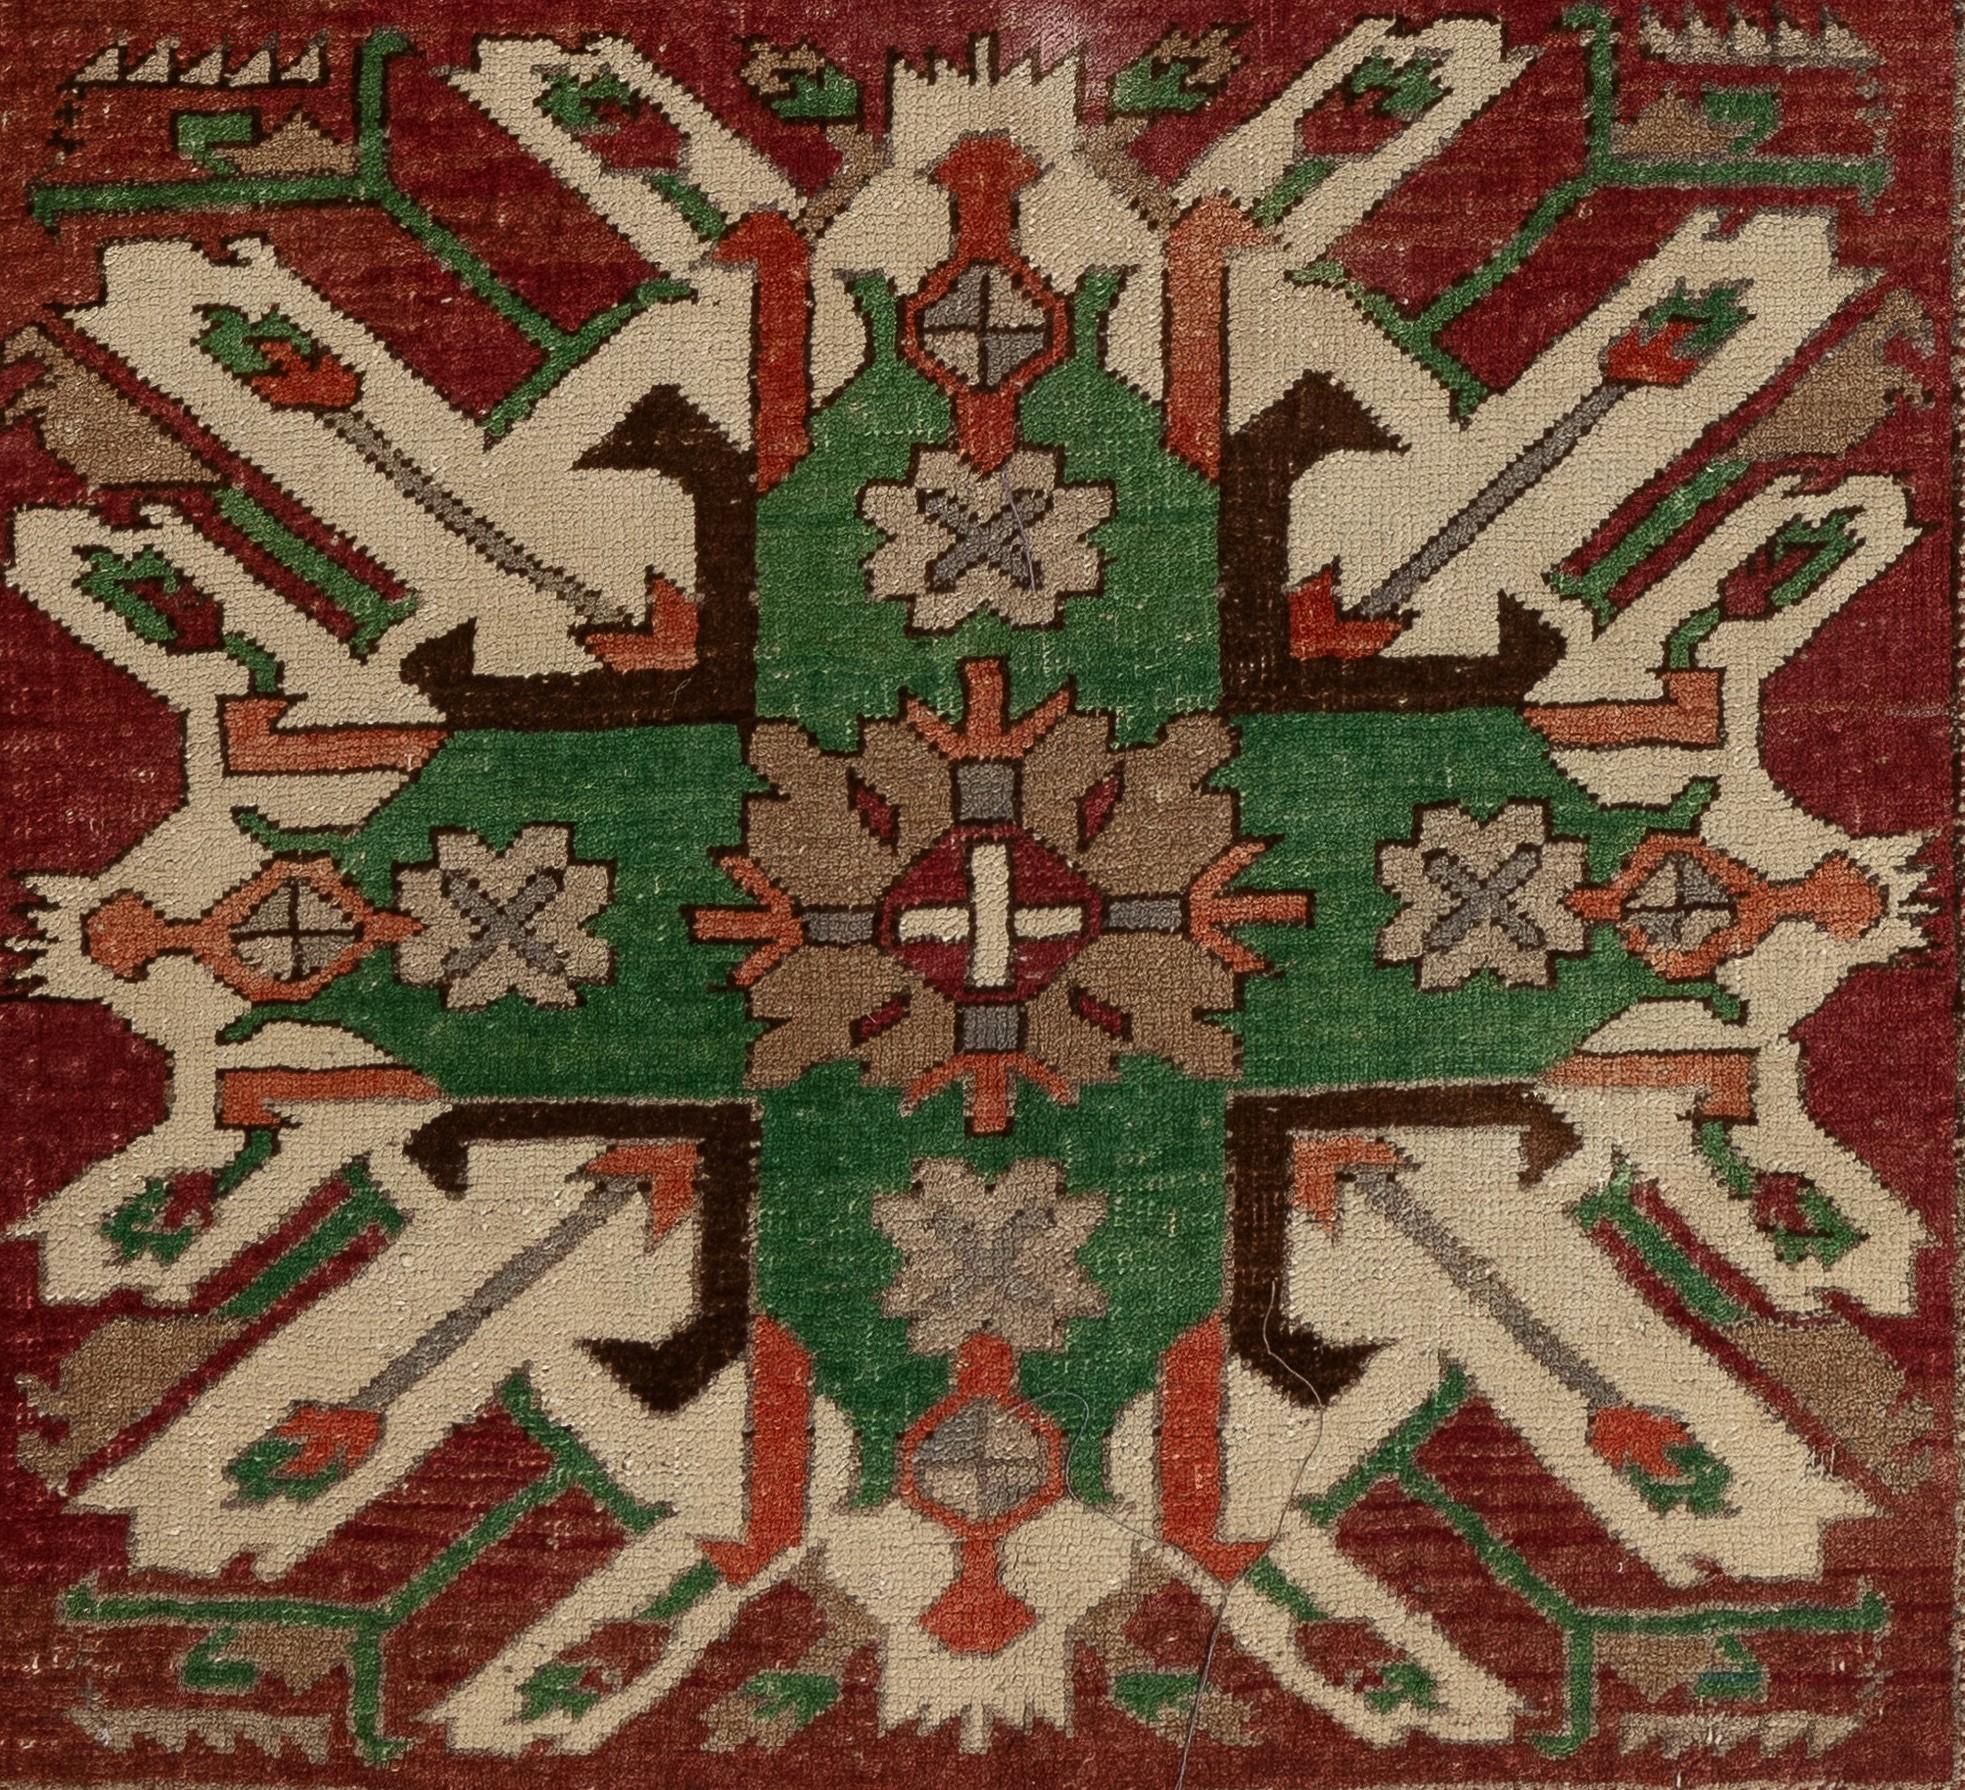 A vintage 1930s Caucasian rug from the village of Chelaberd in Southern Karabakh. This highly popular so called Sunburst or Eagle Kazak design rugs are some of the most collectible and sought after ones among all antique Caucasian works of textile